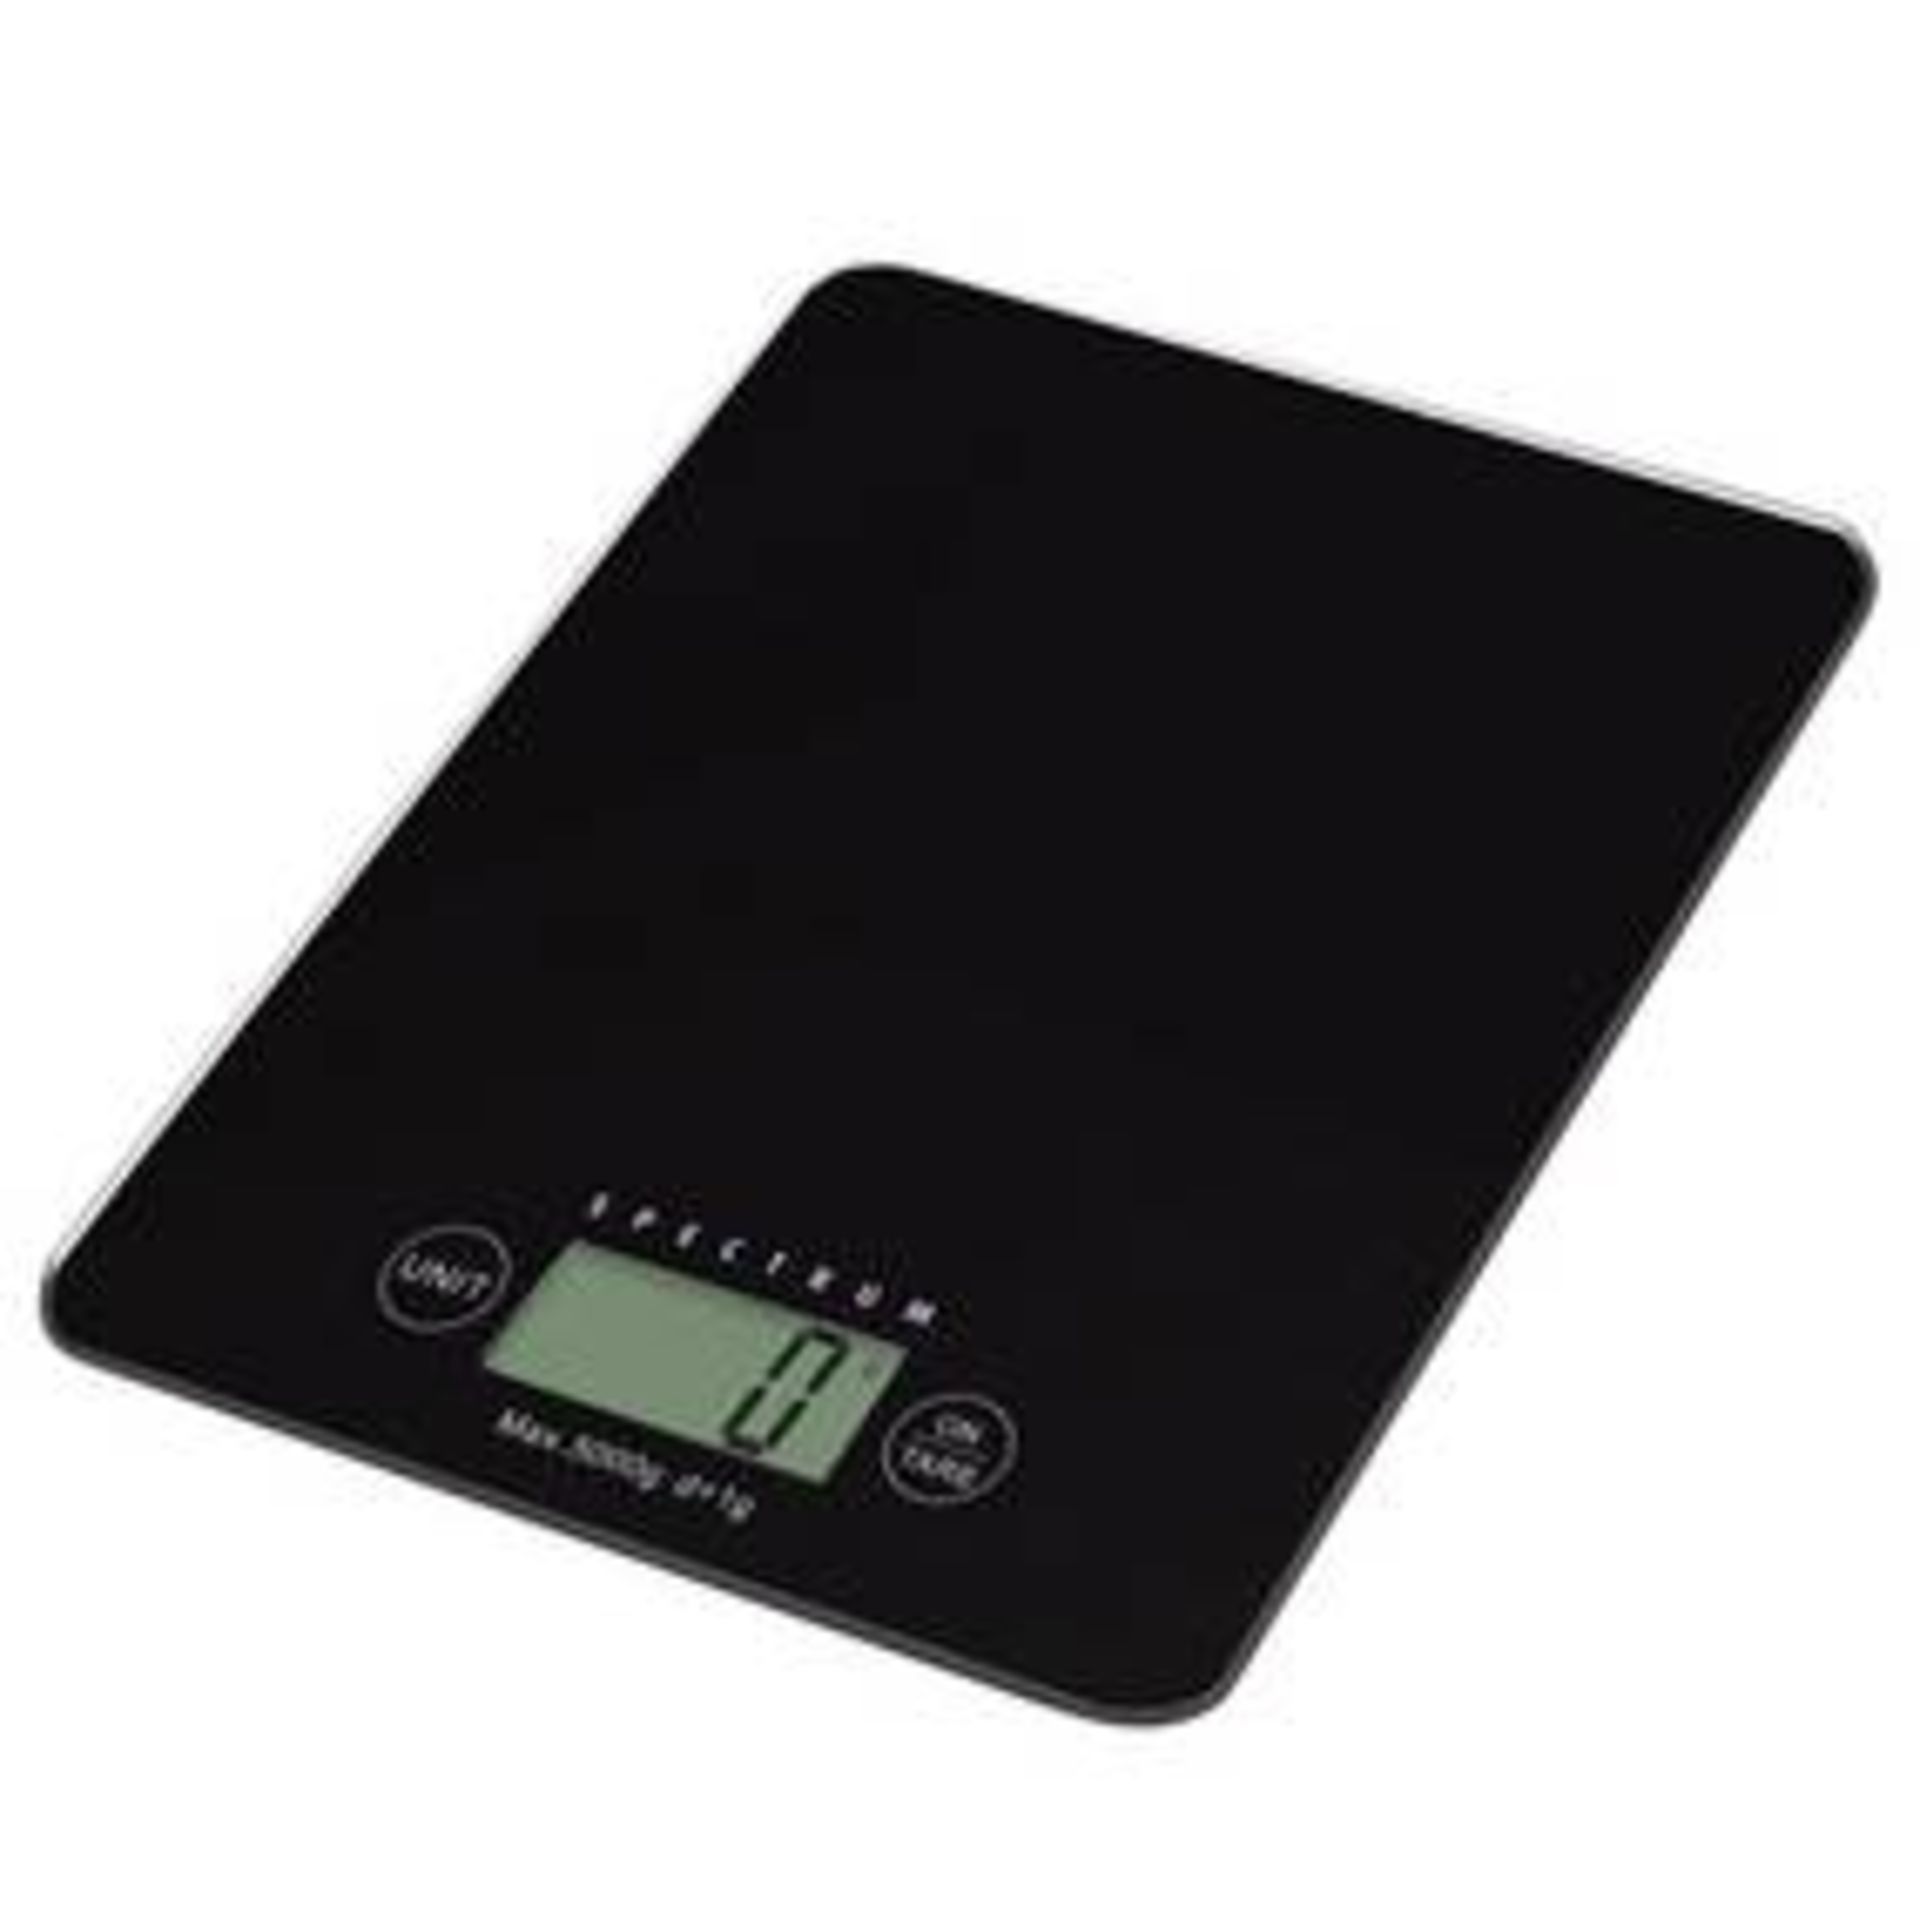 V Brand New Digital Kitchen Scales with Large LCD Display in lbs OZs and Grams (Styles may vary